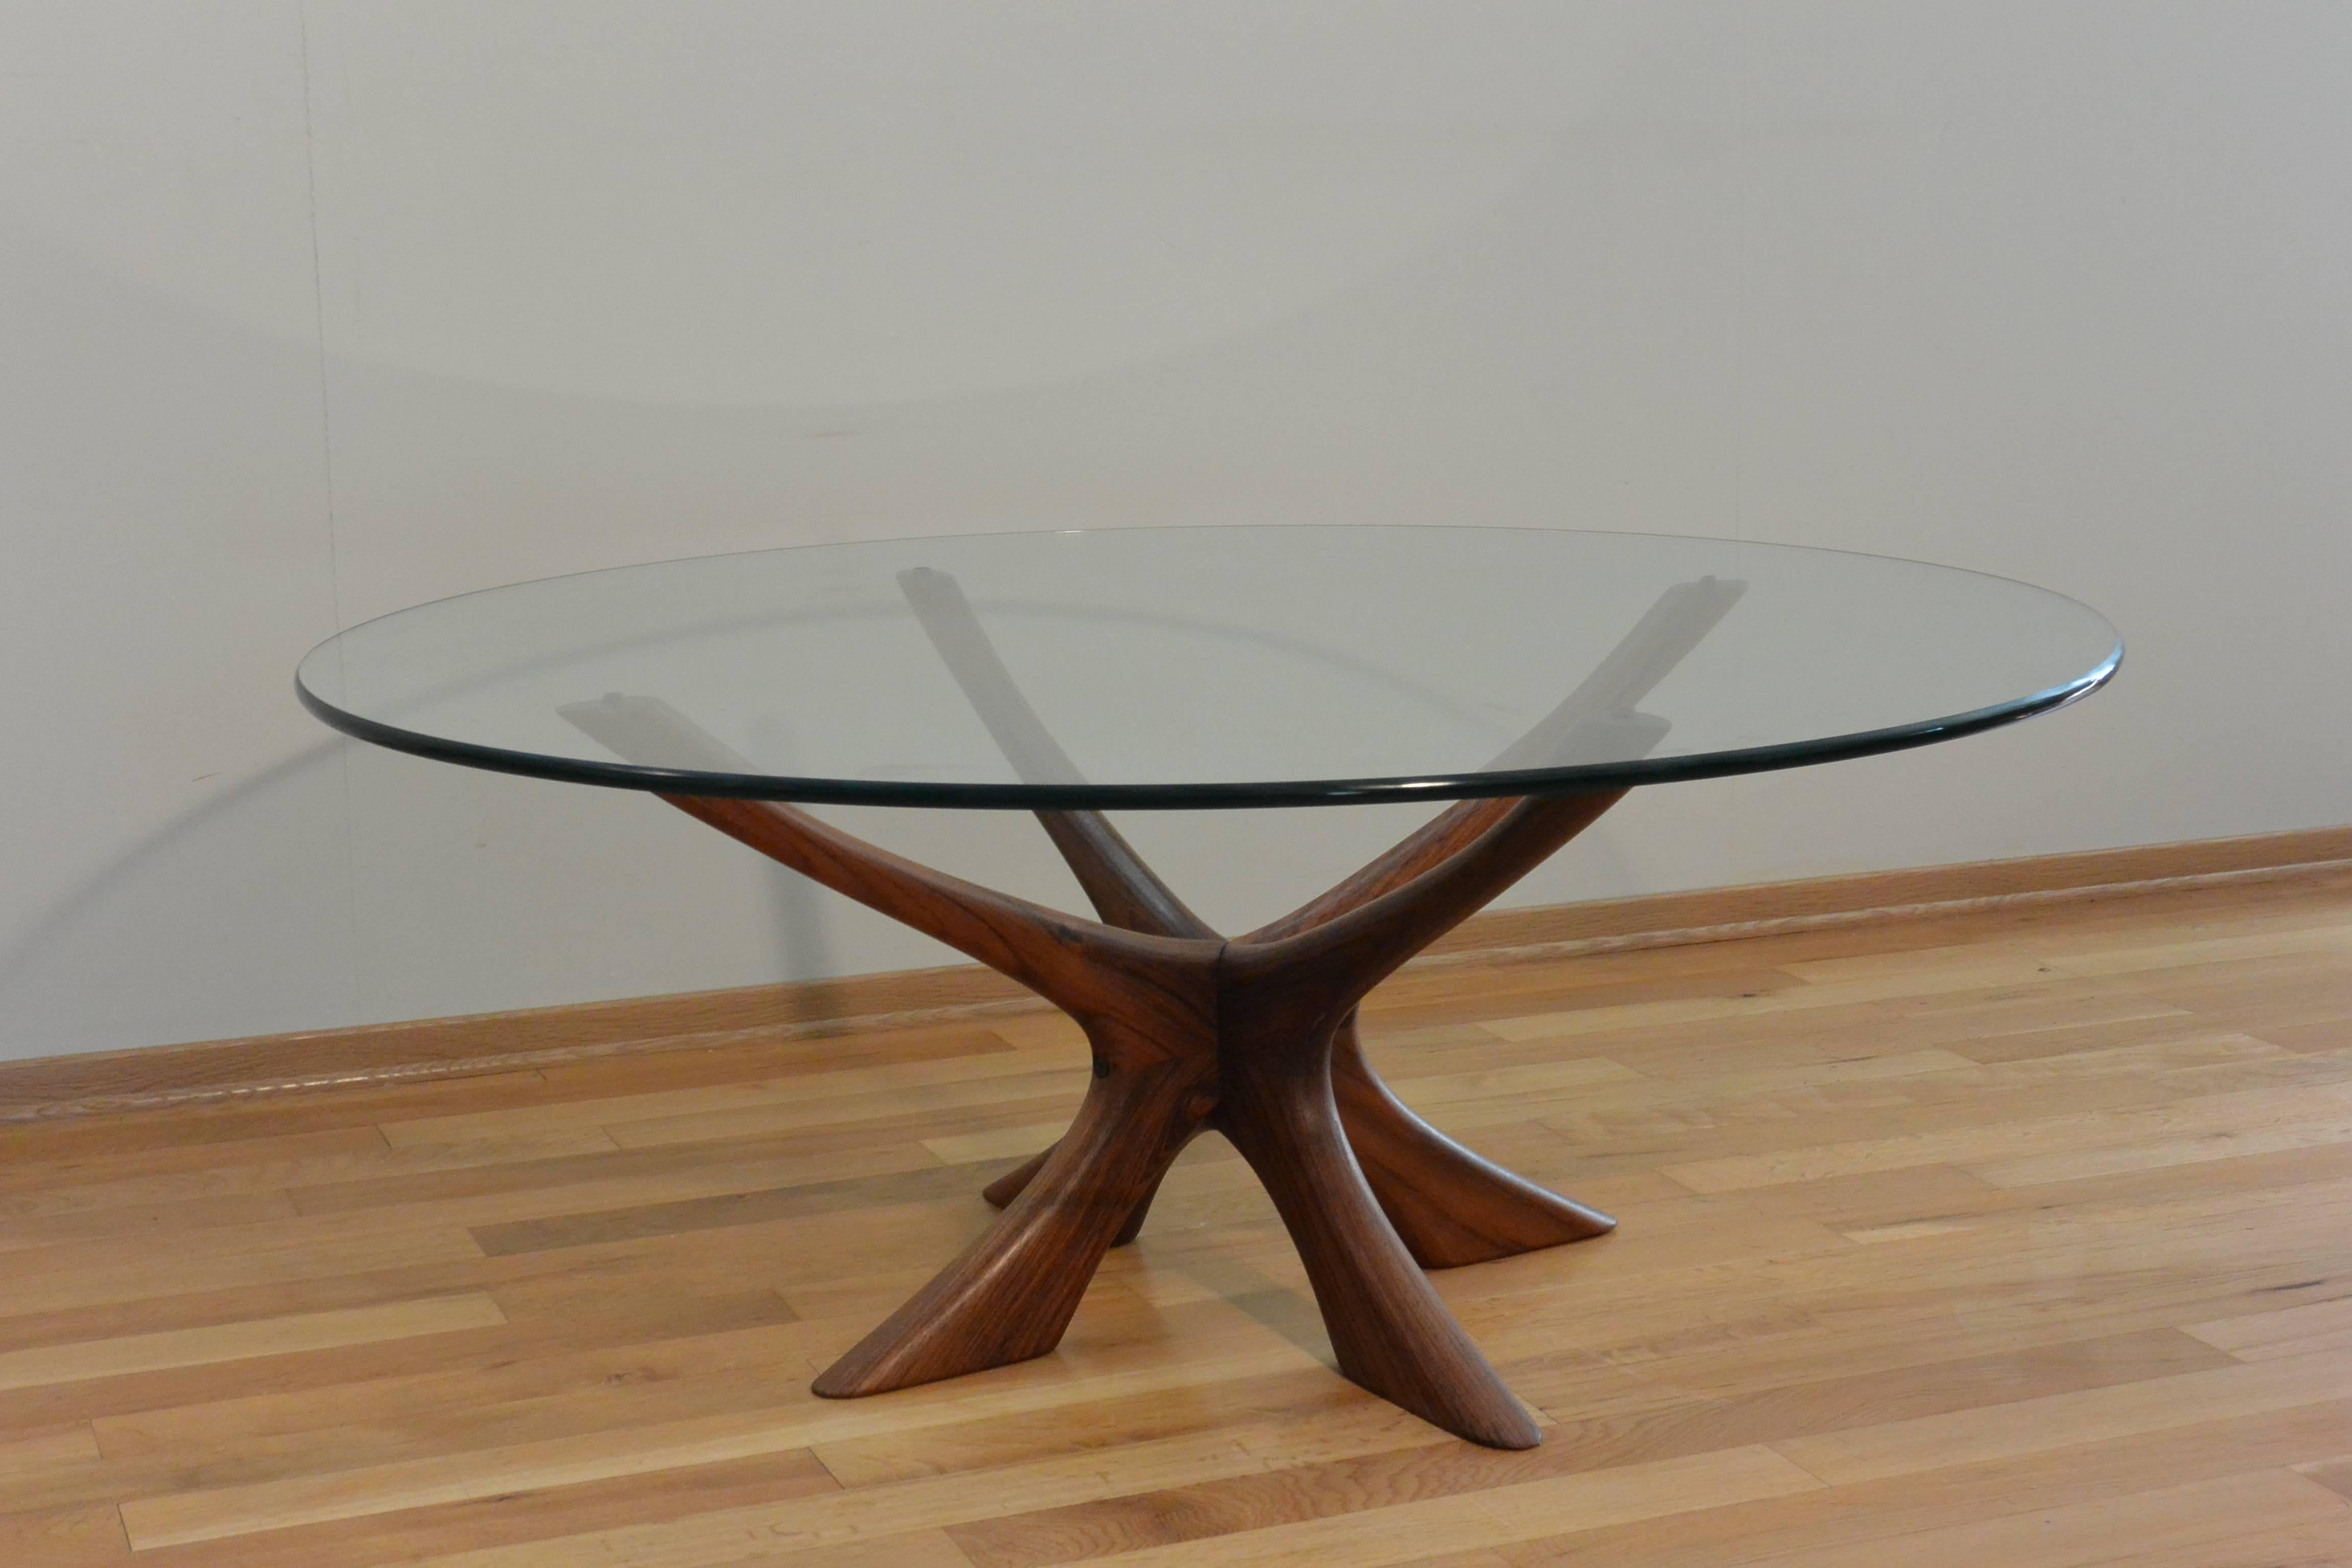 Elegantly sculptured teak base table with bevelled glass top was designed by Illum Wikkelso, Denmark, 1960s. Illum Wikkelso often designed practical and useful furniture with added focal theme. Some believe the base is modelled to resemble antlers,